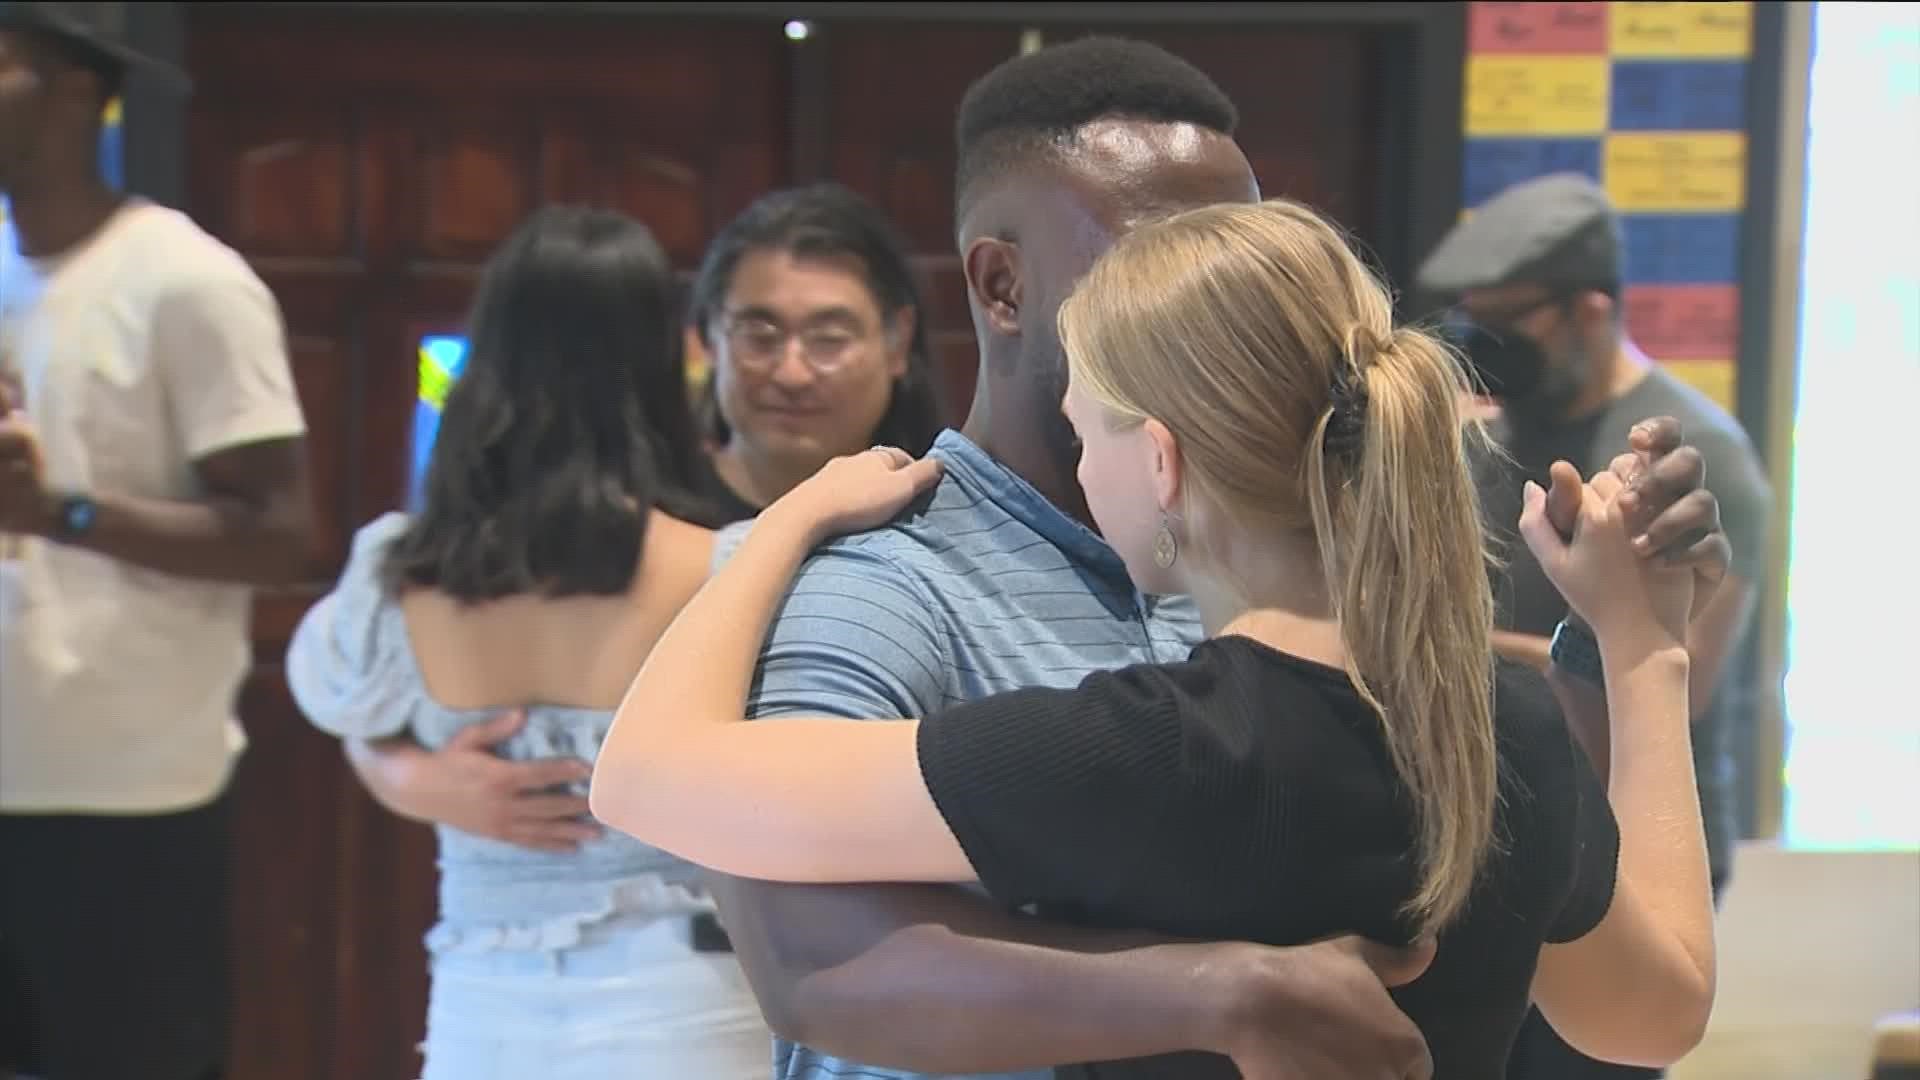 Esquina Tango has been bringing Latin dance to East Austin for the last 16 years. KVUE's Pamela Comme has the story.